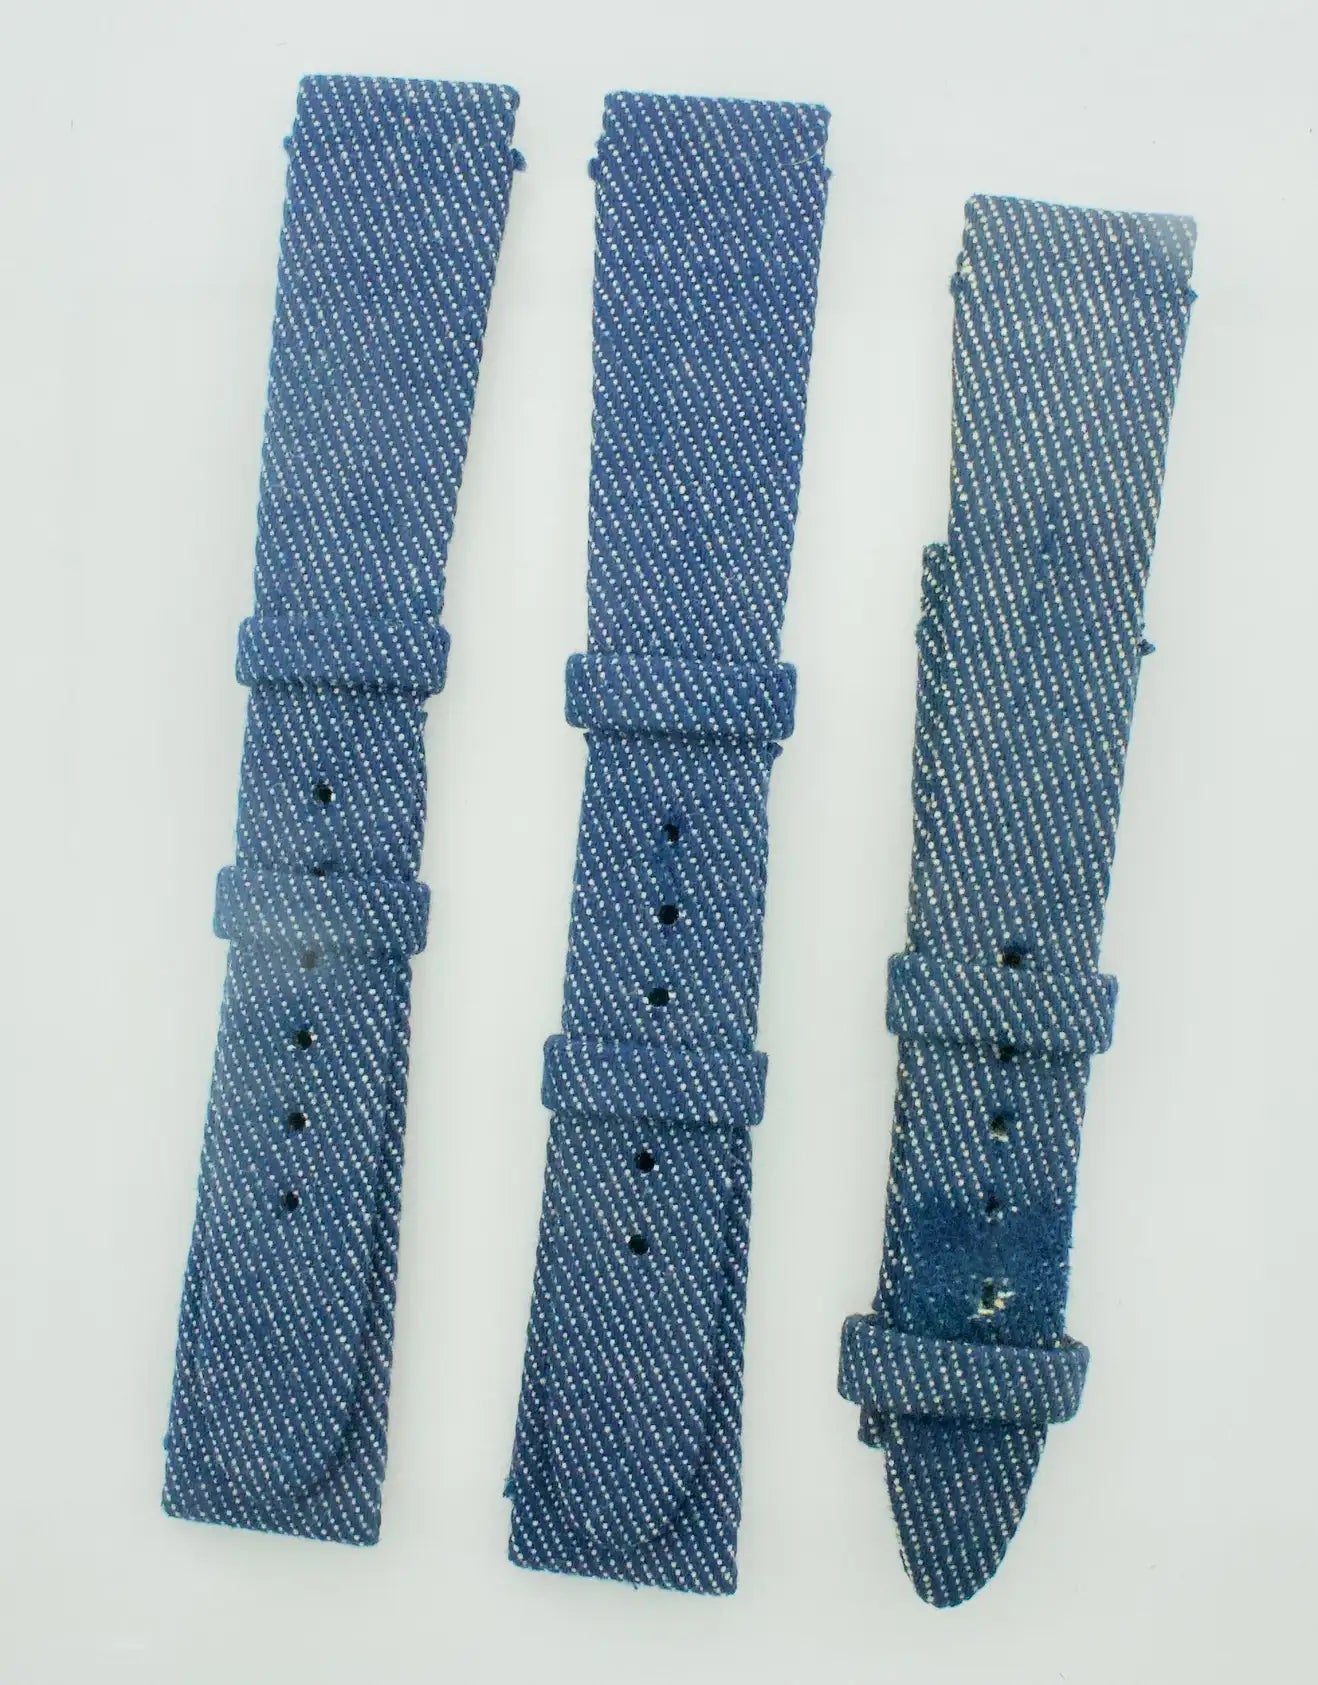 Van Cleef & Arpels Denim Watch in Stainless Steel with 3 Extra Bands and Pouch